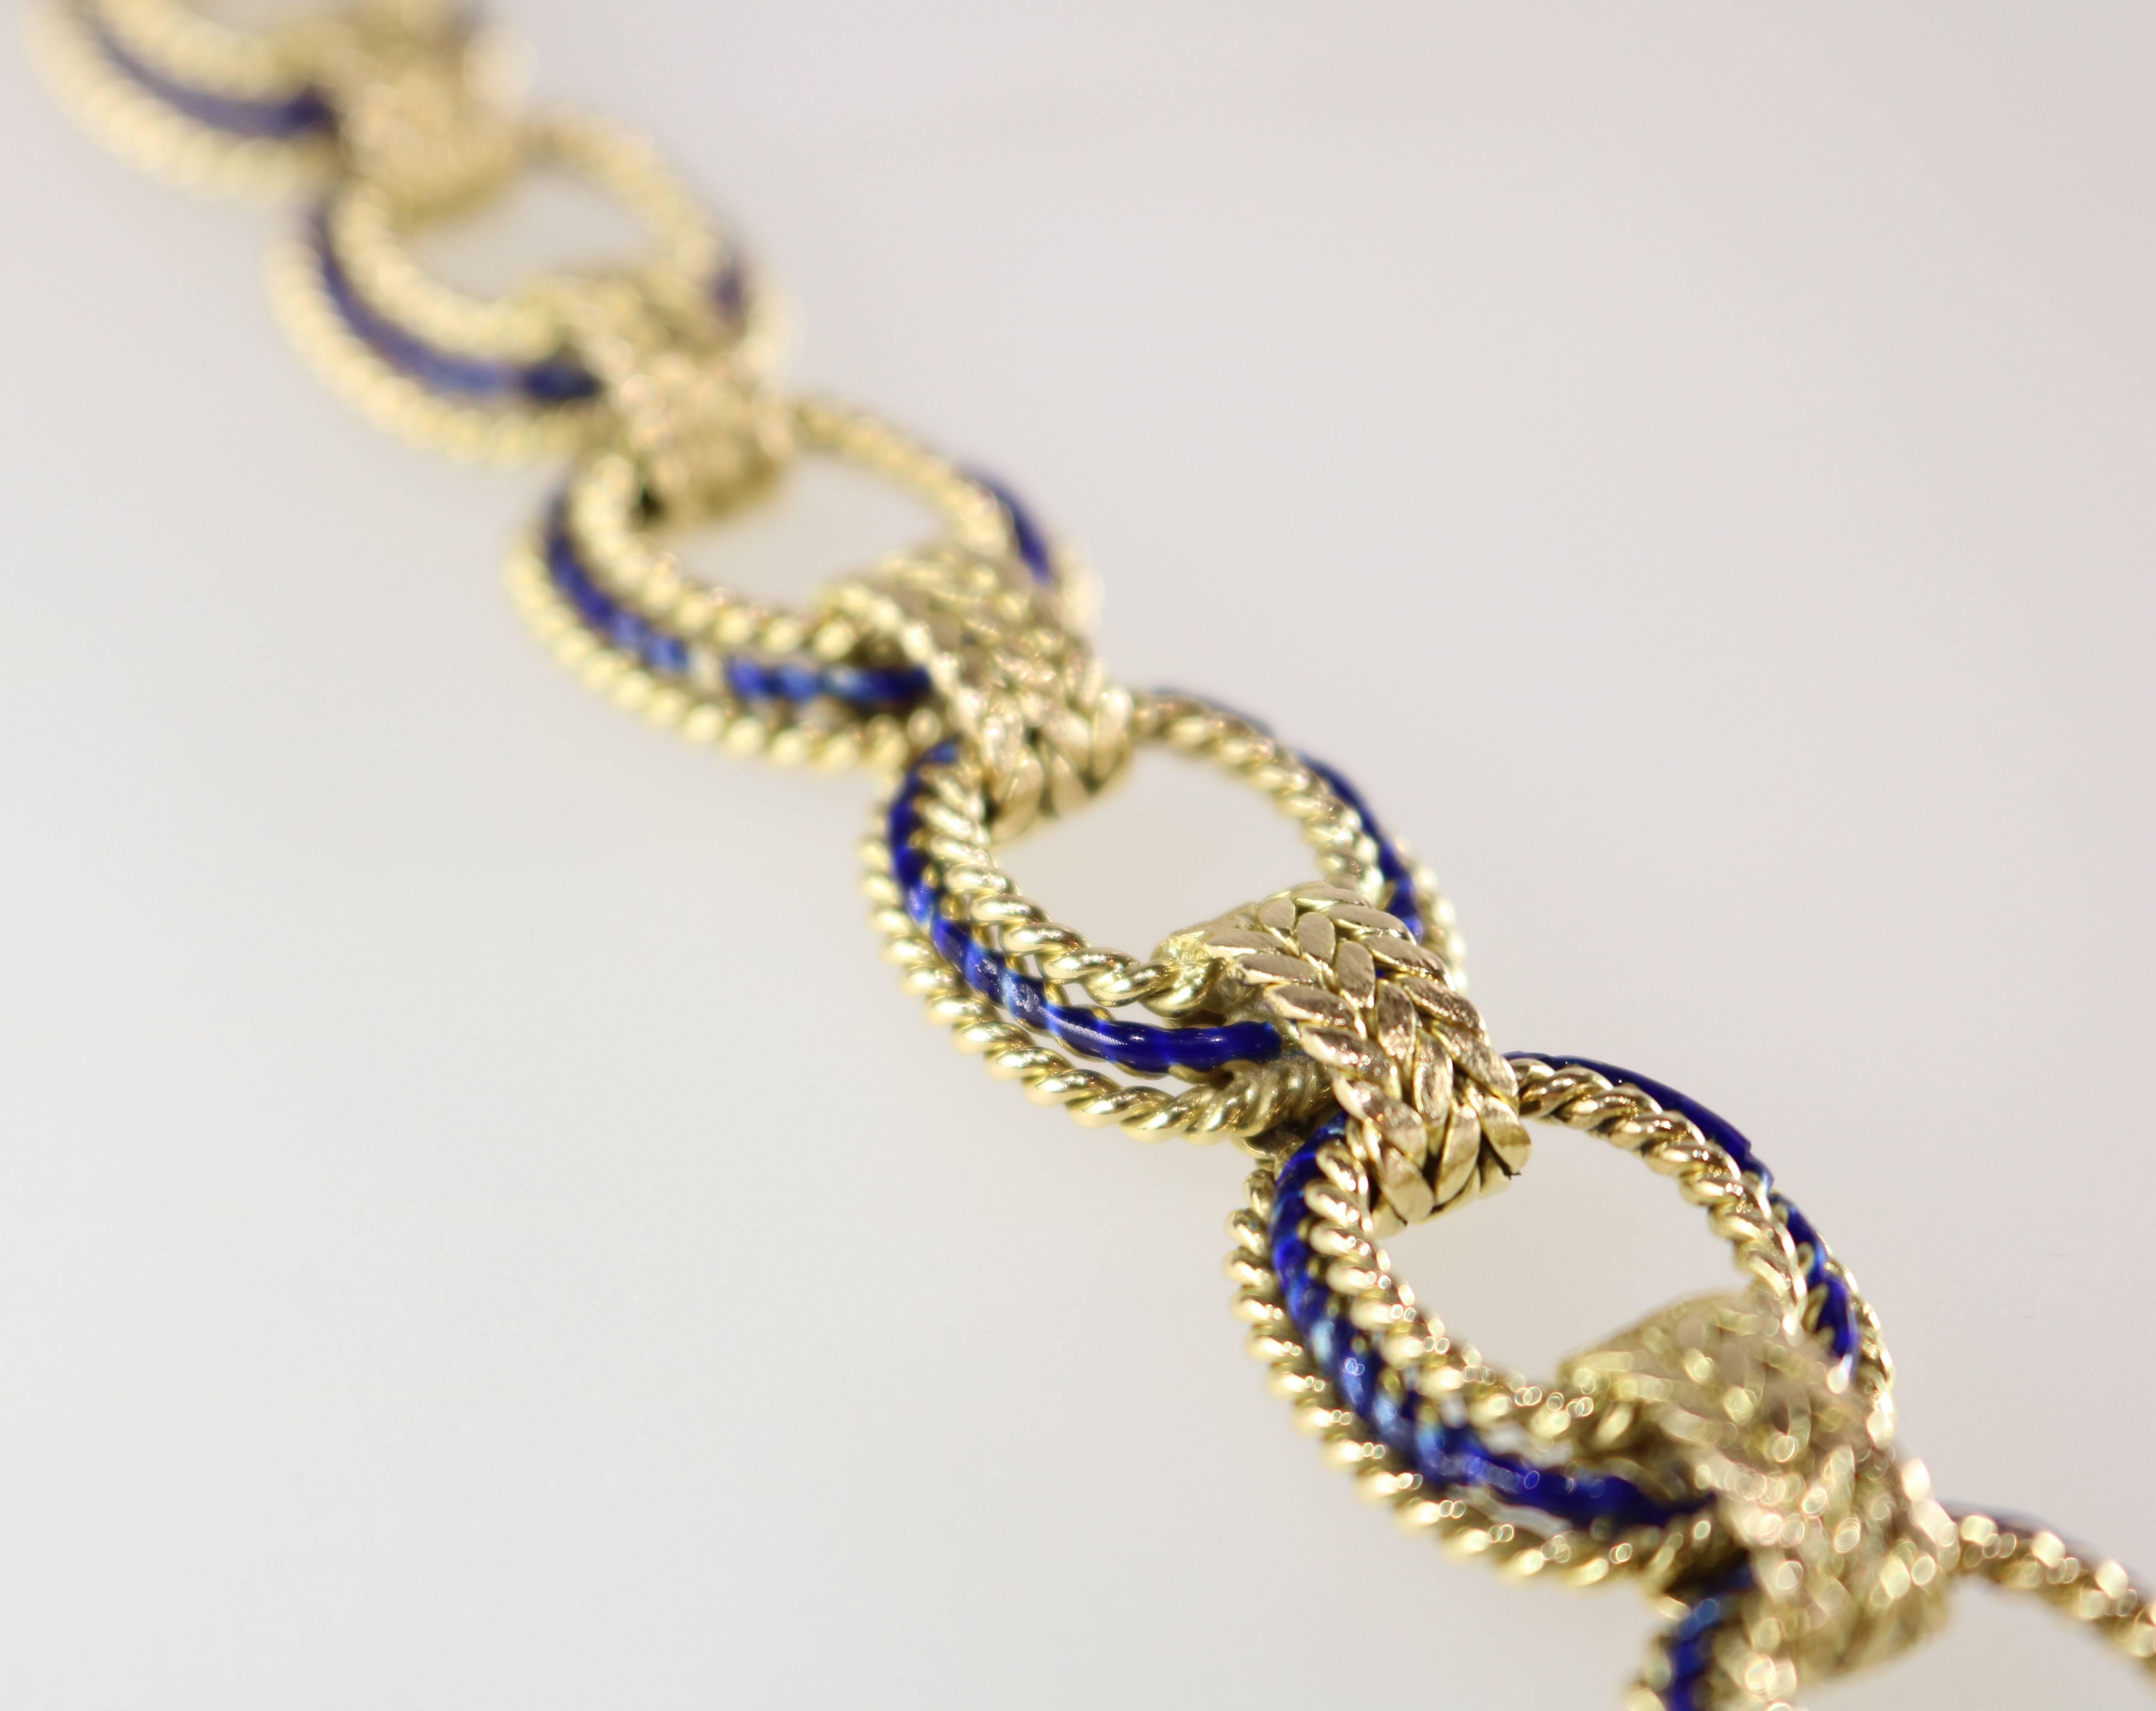 This very pretty bracelet consists of a series of tiered corded wire work oval links with applied blue enamel and herringbone textured connections.
Bracelet length is 7 3/4 inches.

Metal Type: 18 Karat Yellow Gold.